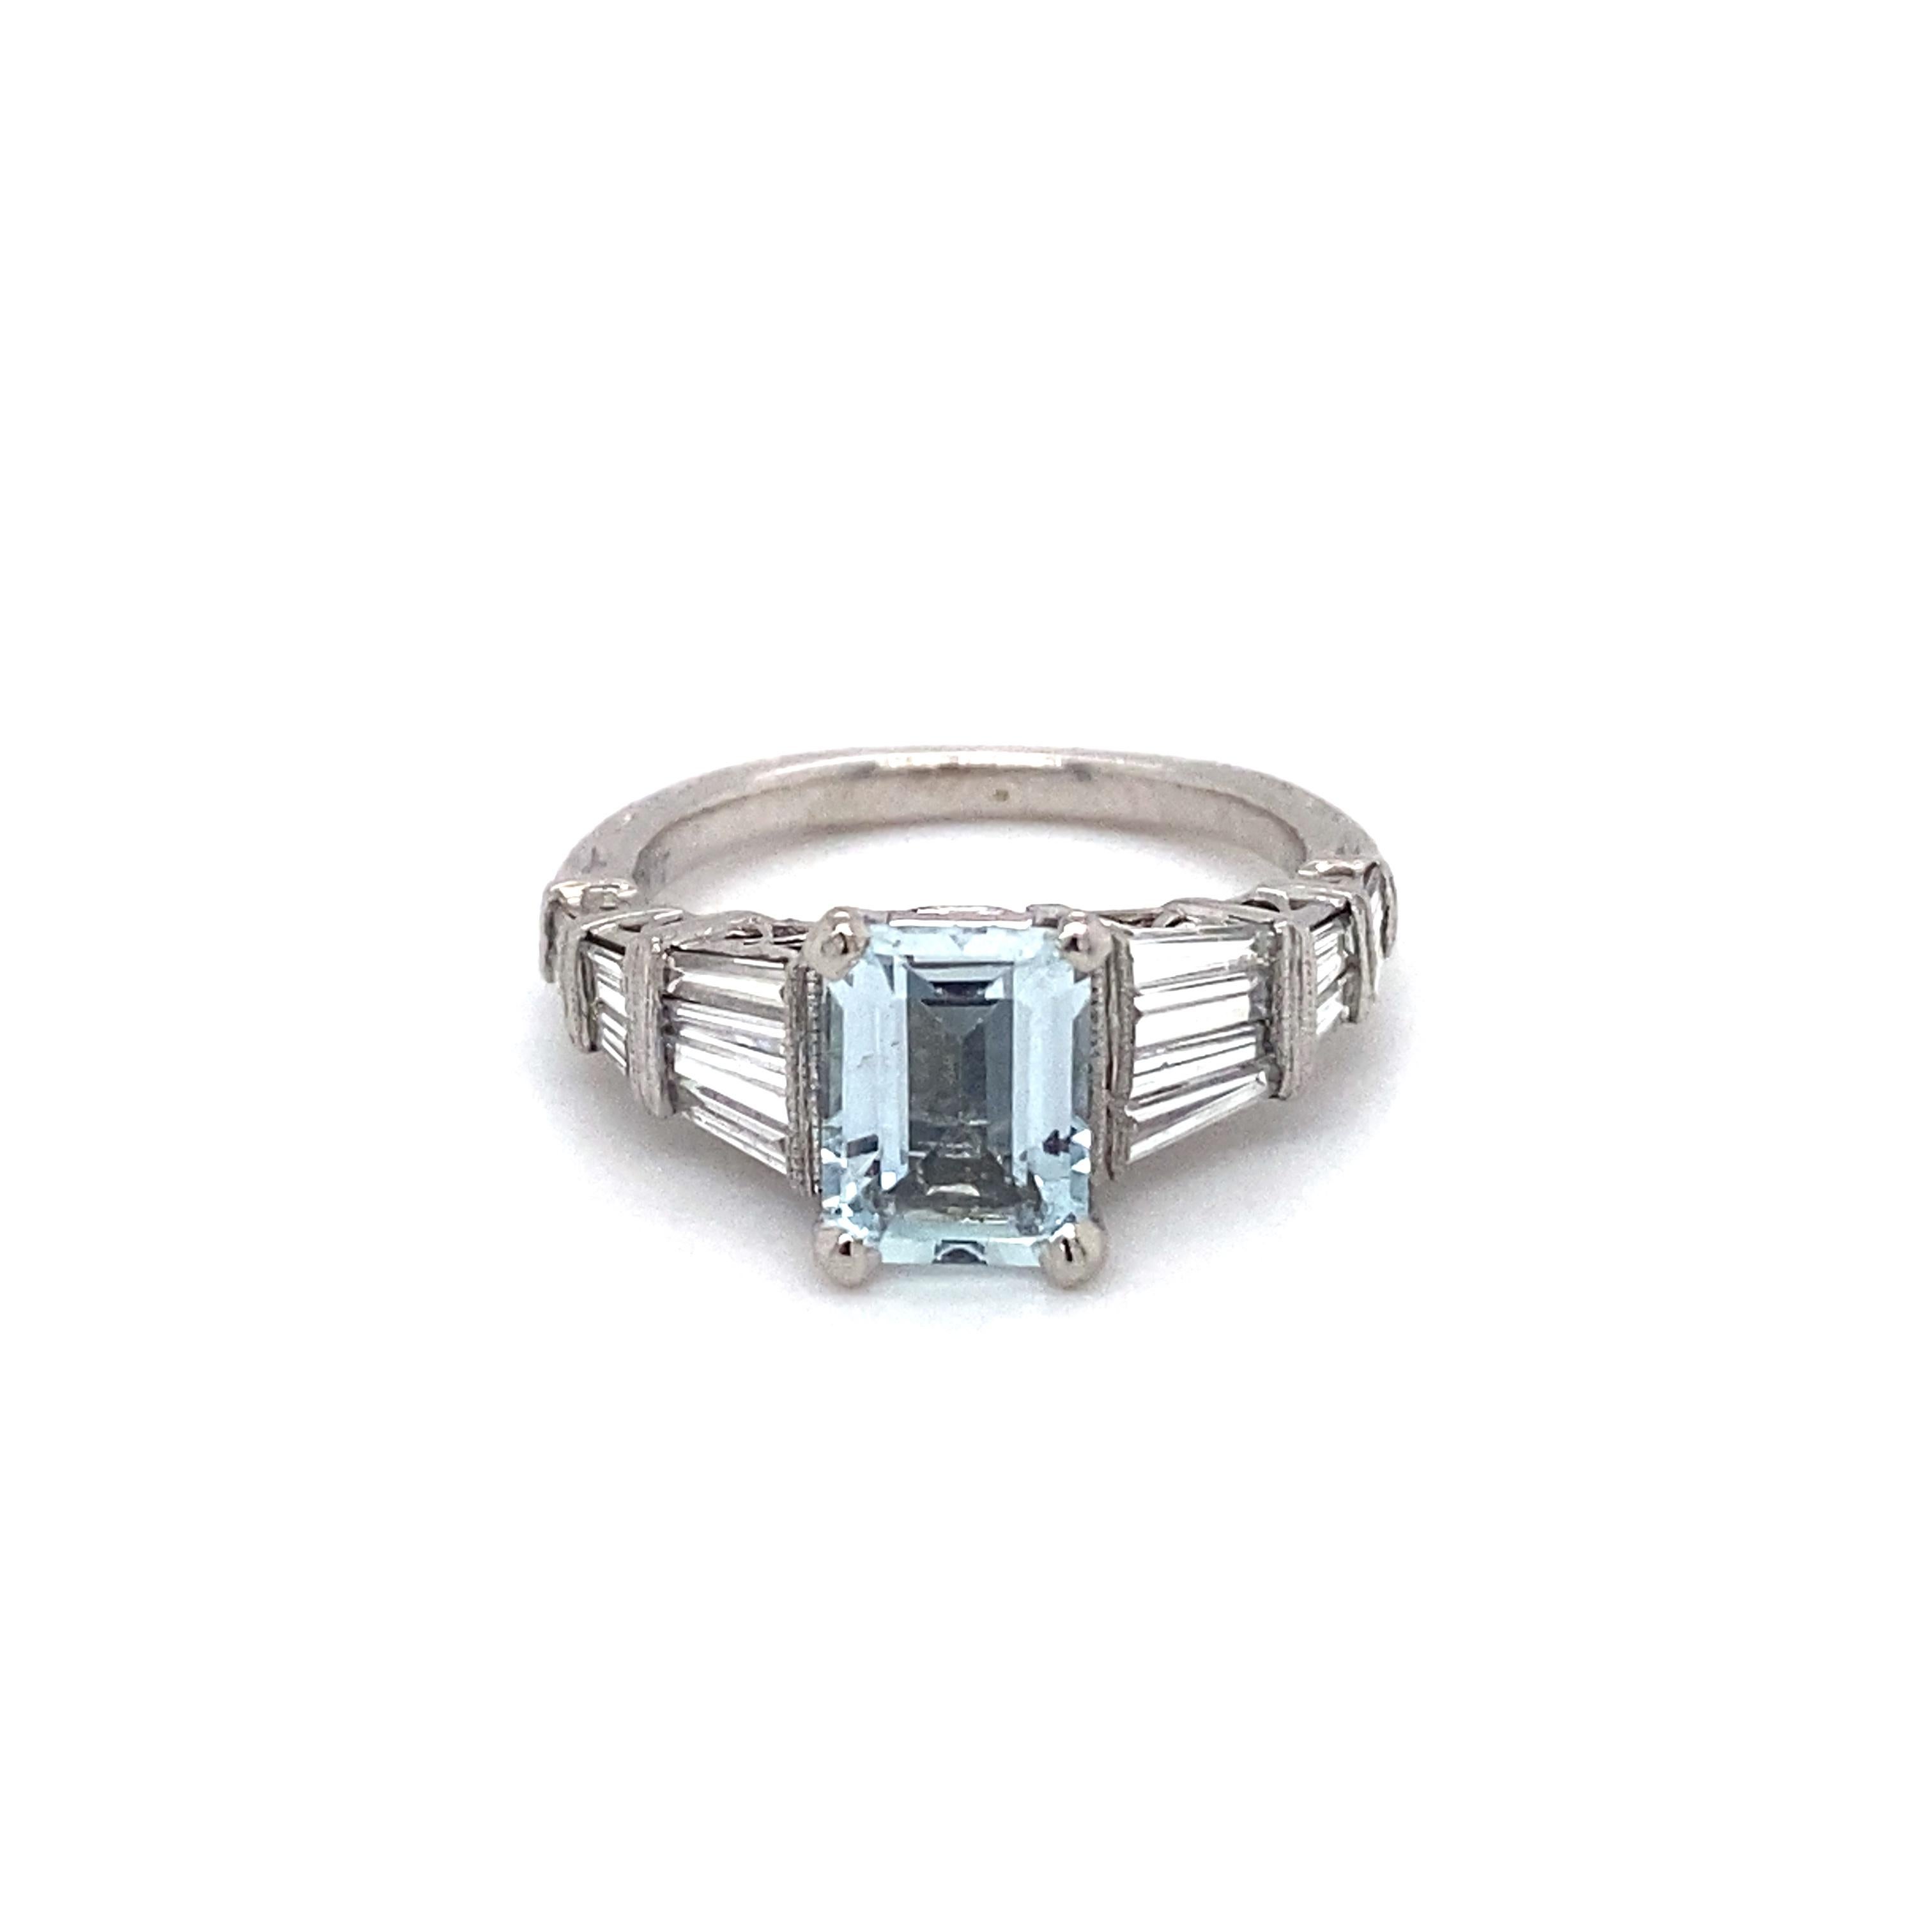 Circa: 1980s
Metal Type: Platinum
Weight: 7 grams 
Size: US 6.25 (resizable)

Diamond Details:

Carat: 1.17 carat total weight
Shape: Tapered baguettes
Color: G
Clarity: VS

Aquamarine Details: 

Carat: Approximately 2 carats
Shape: Emerald